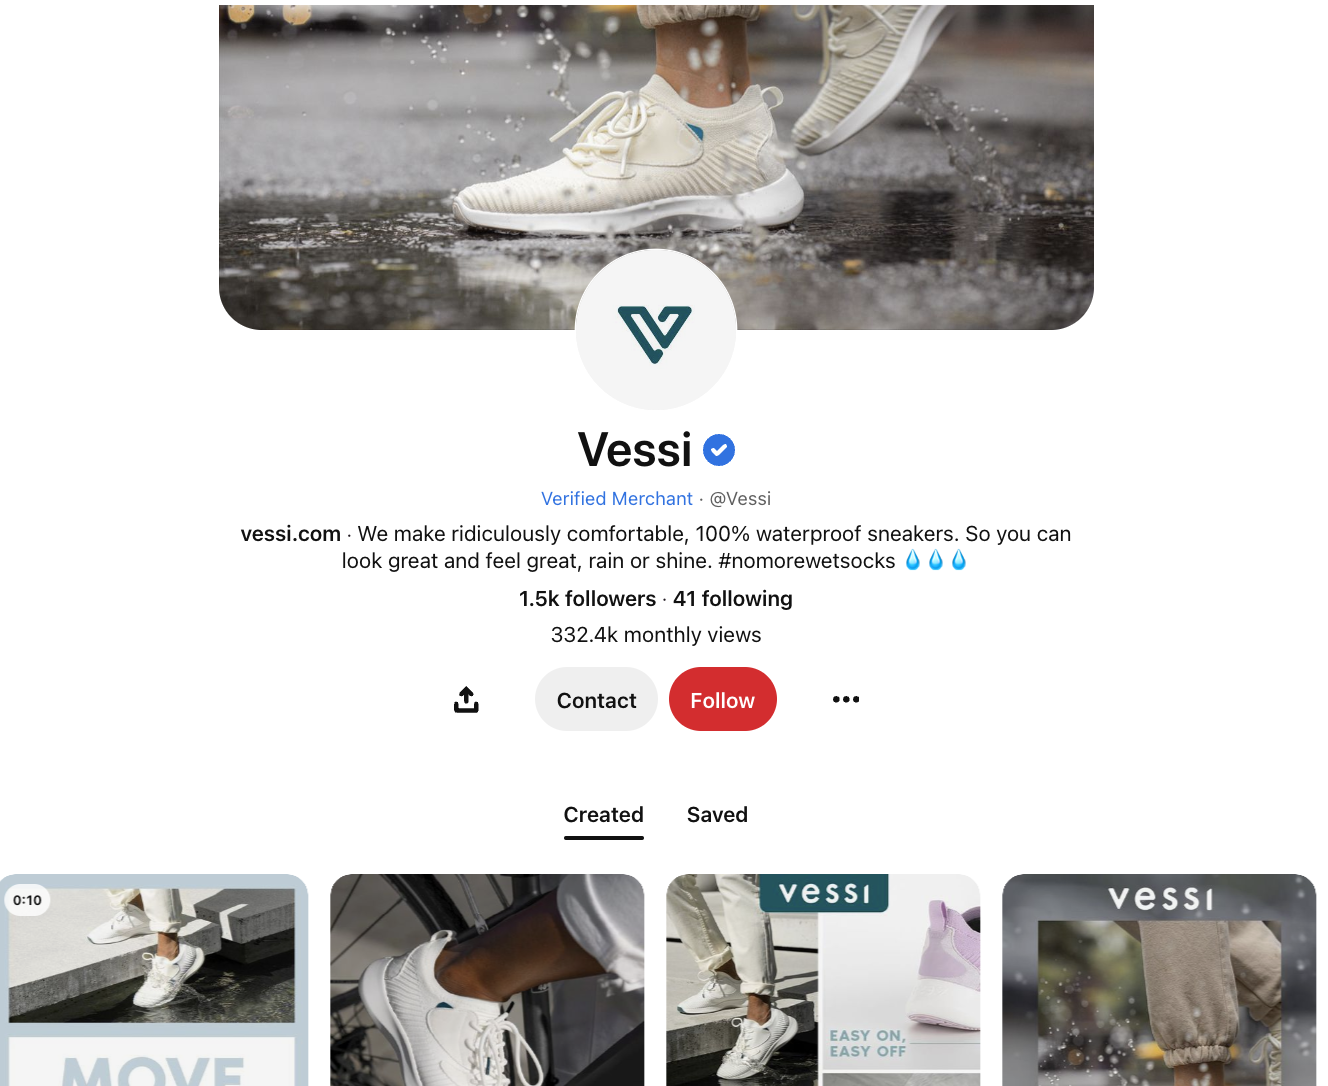 Vessi Sneakers’ Pinterest bio is optimized for SEO